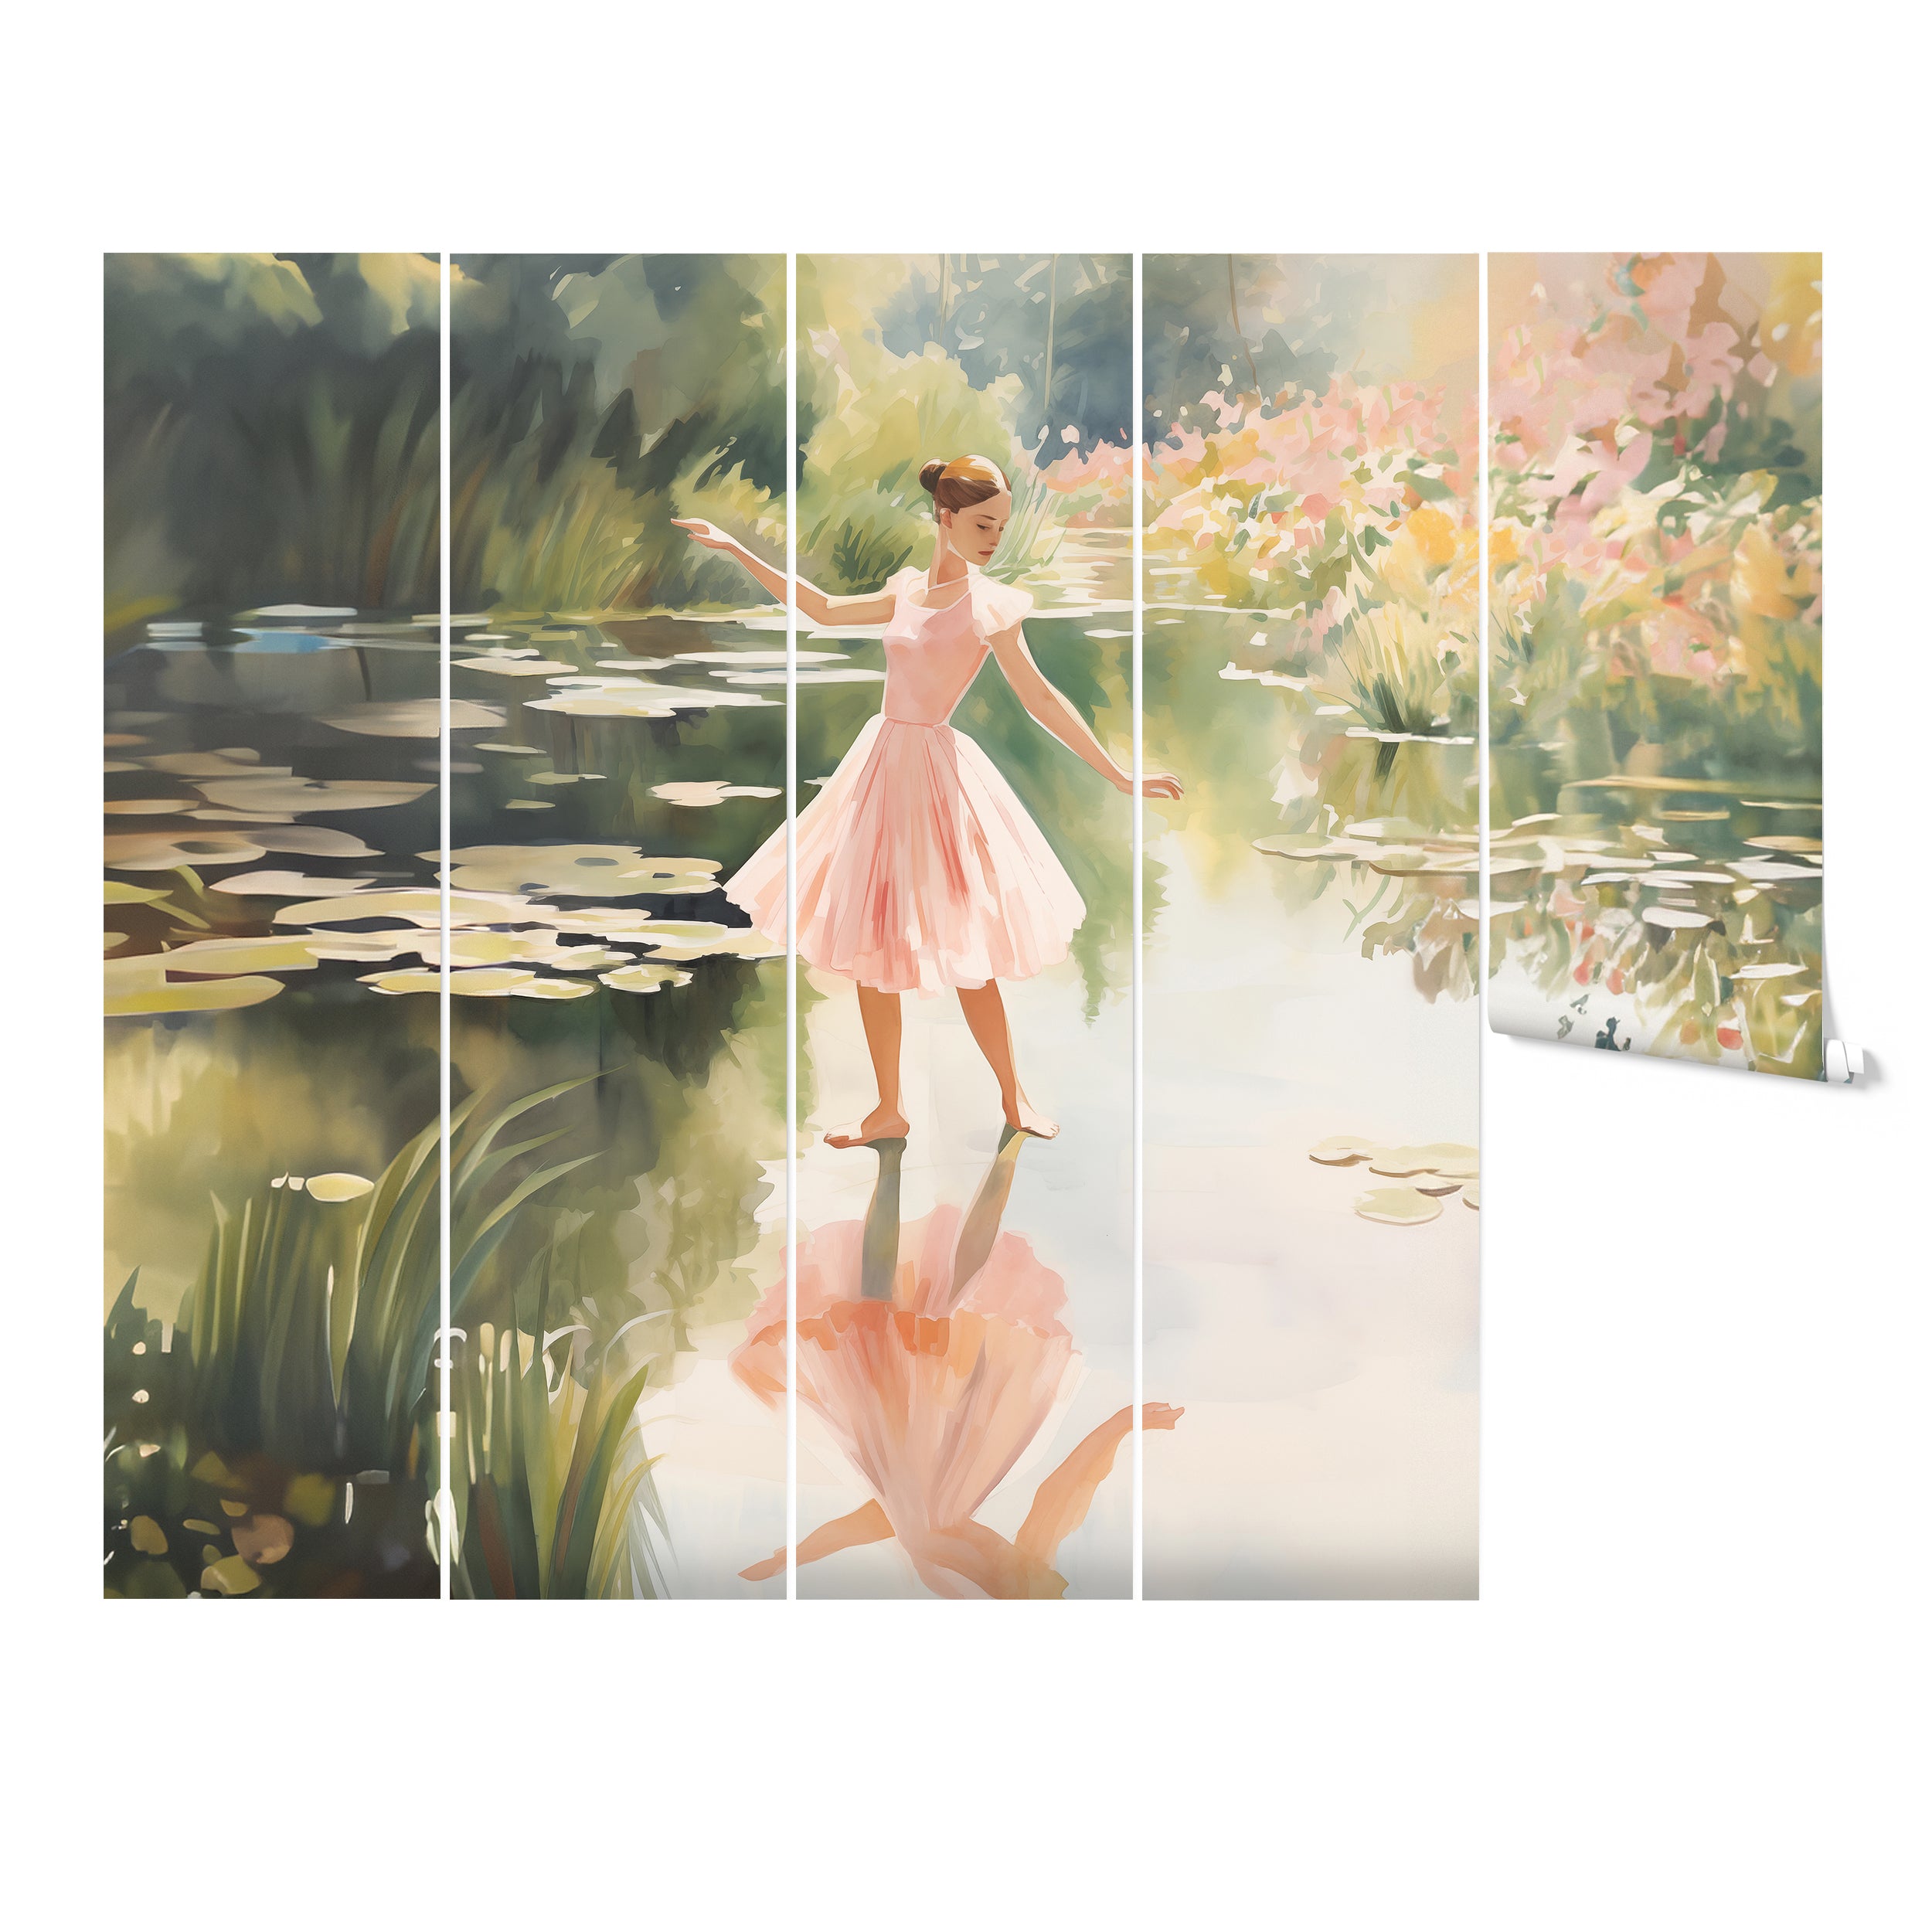 A five-panel mockup of a mural showing a ballerina dancing by a water's edge, reflecting in the water, with a backdrop of flowering shrubs and lily pads